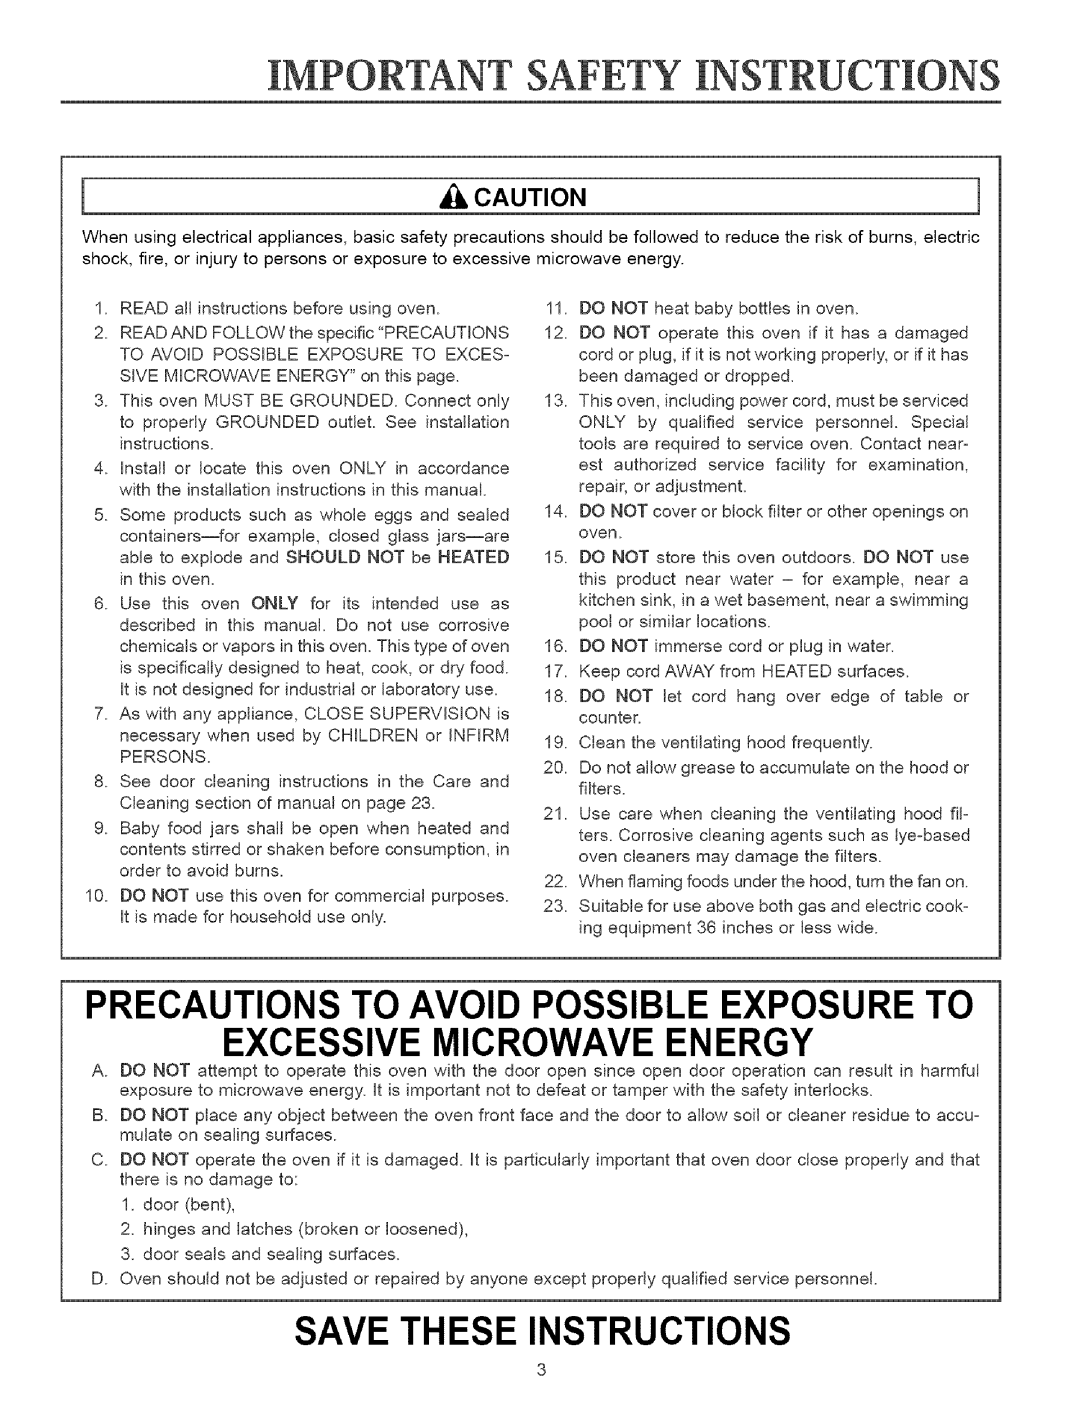 Maytag MMVS156AA Precautions To Avoid Possible Exposure To, Excessive Microwave Energy, Save These Instructions, iCAUTION 